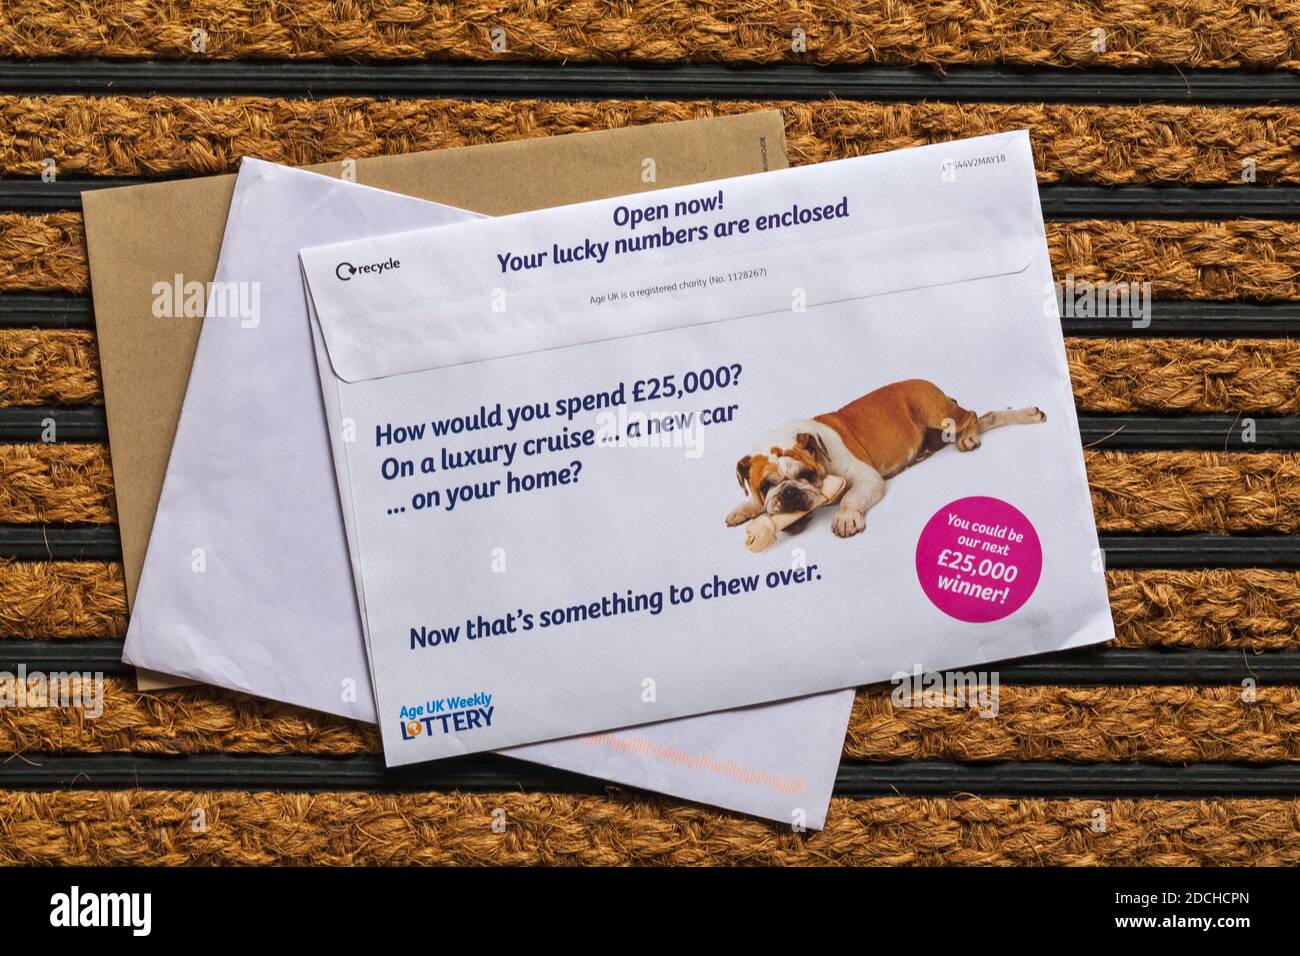 Post mail on doormat - Age UK weekly lottery Stock Photo